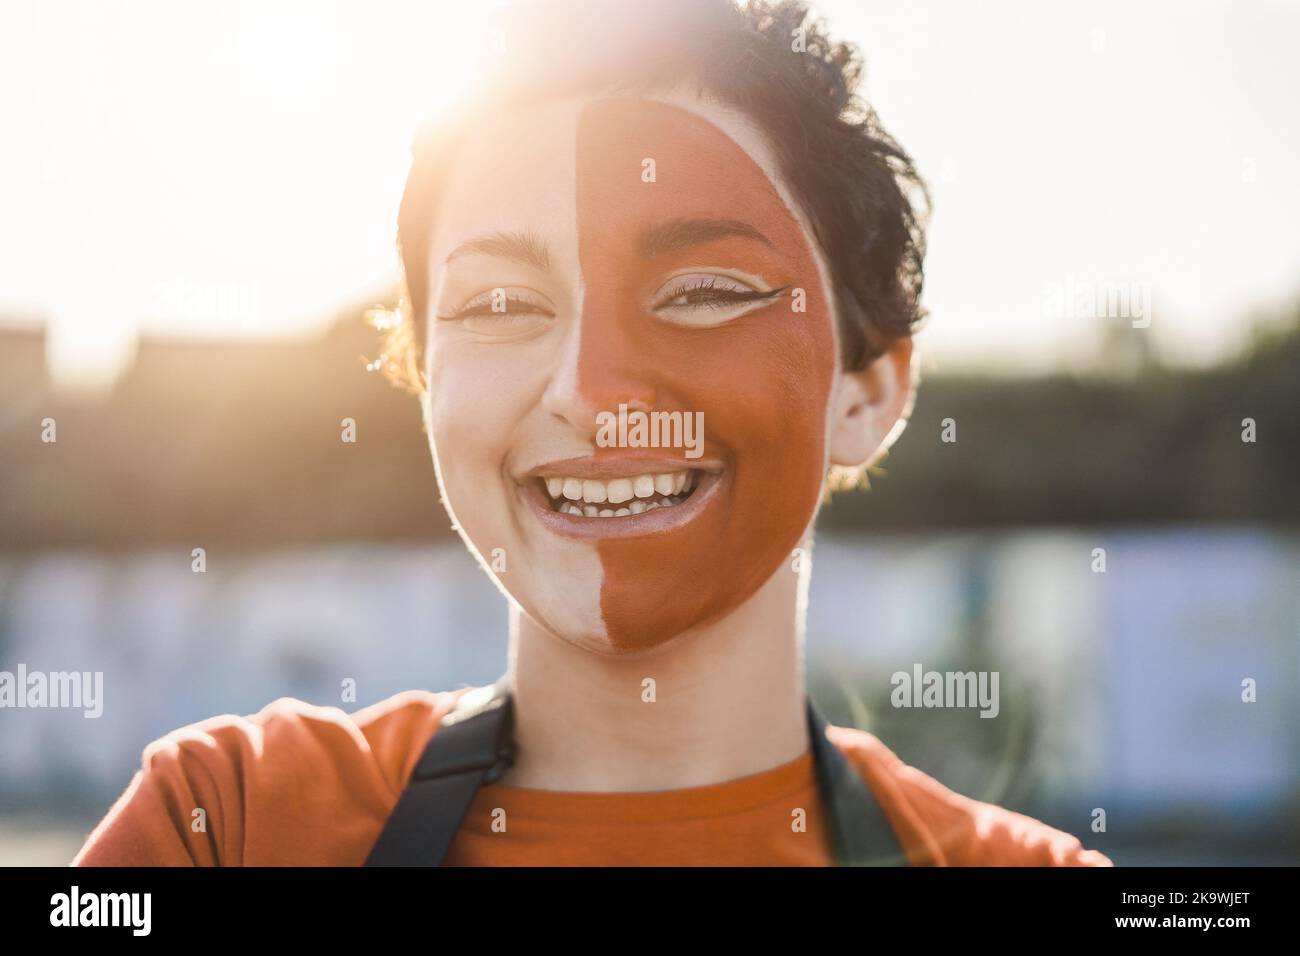 Orange sport fan smiling at camera out of the stadium before football match - Main focus on right eye Stock Photo